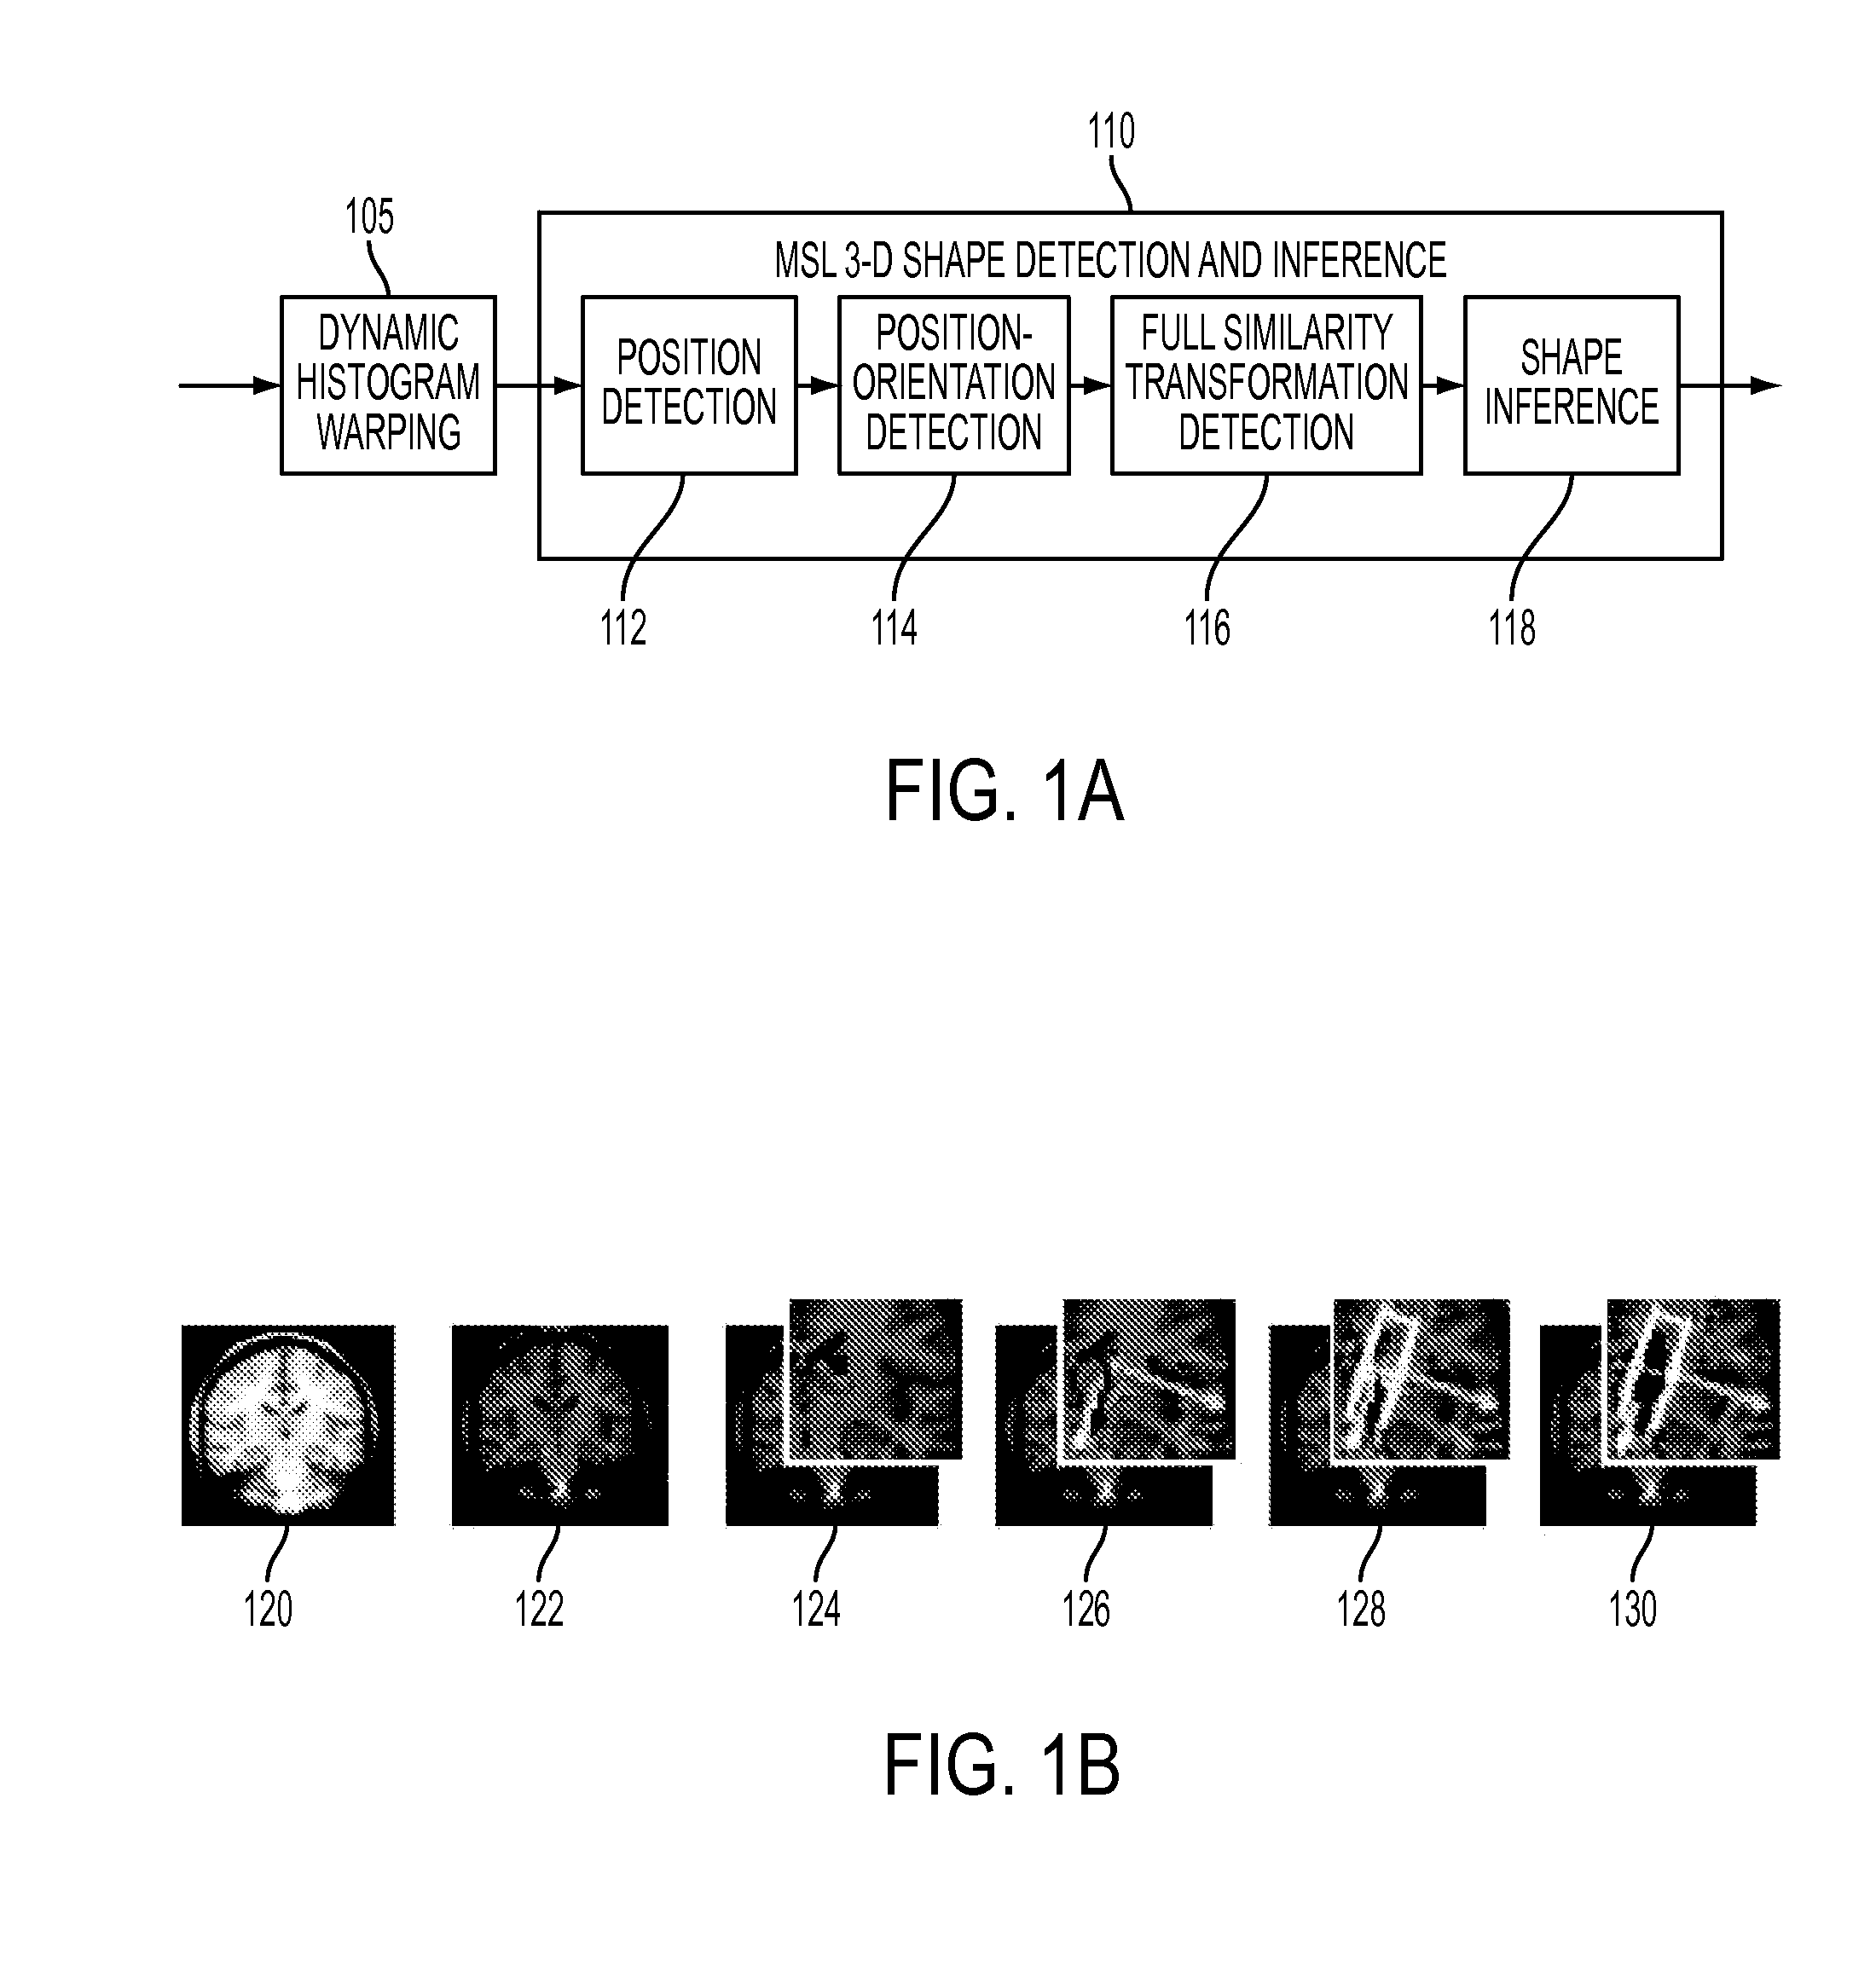 Method and System for Segmentation of Brain Structures in 3D Magnetic Resonance Images